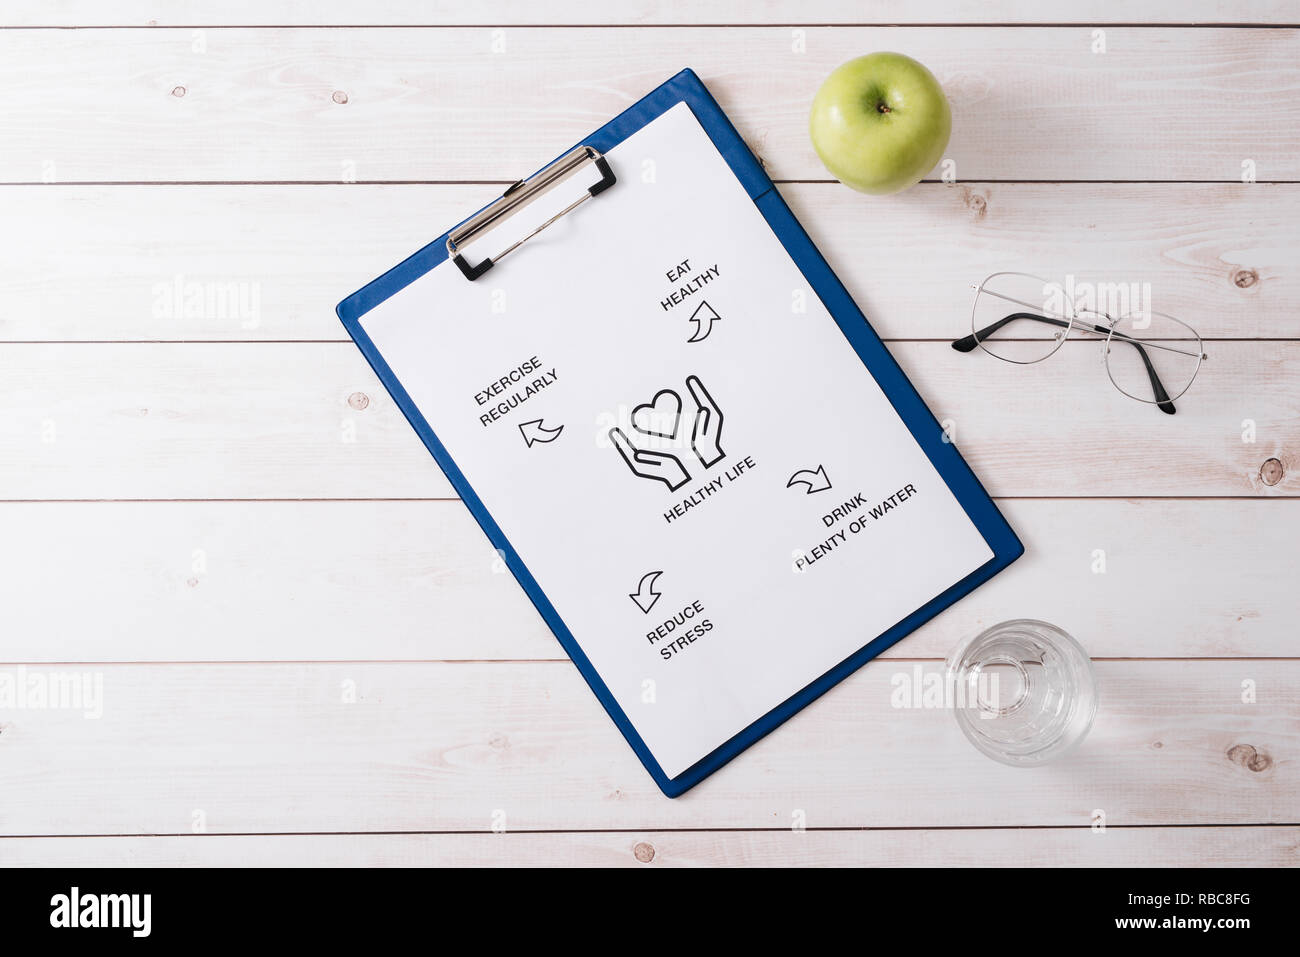 High Angle View Of A Meal Plan Concept On Wooden Desk Stock Photo